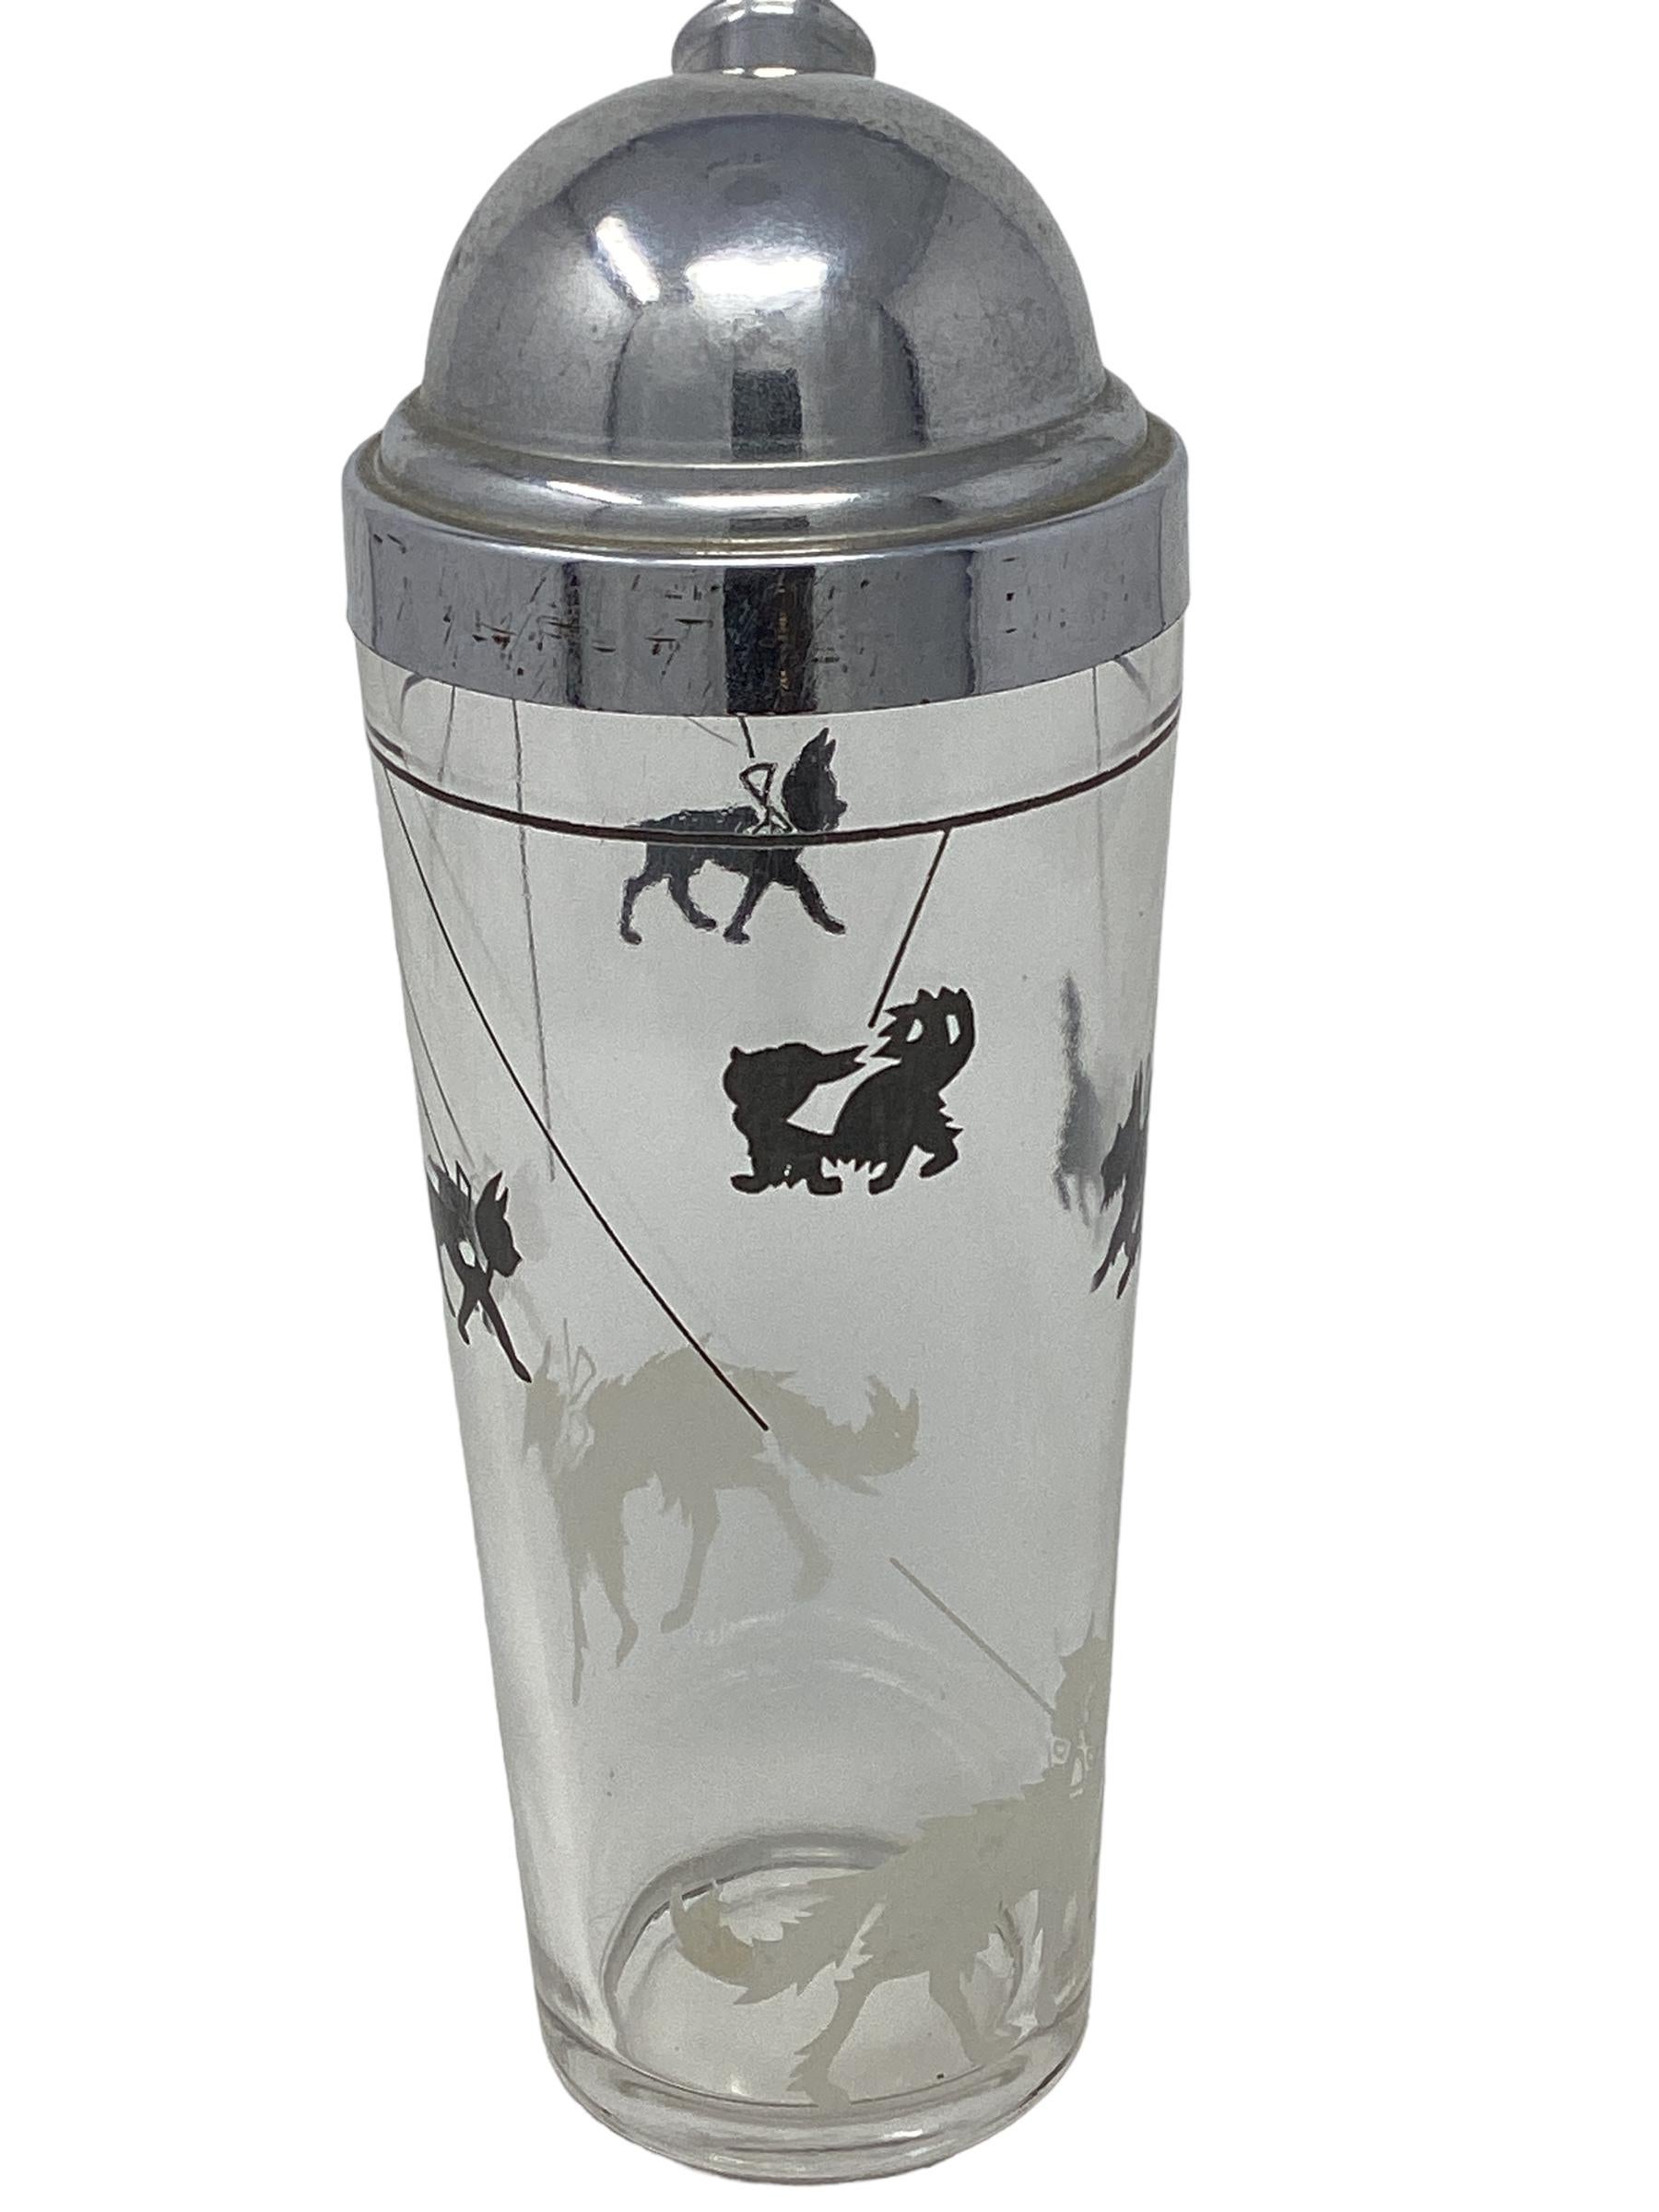 Art Deco Hazel-Atlas Cocktail Shaker with Leashed Dogs For Sale 1